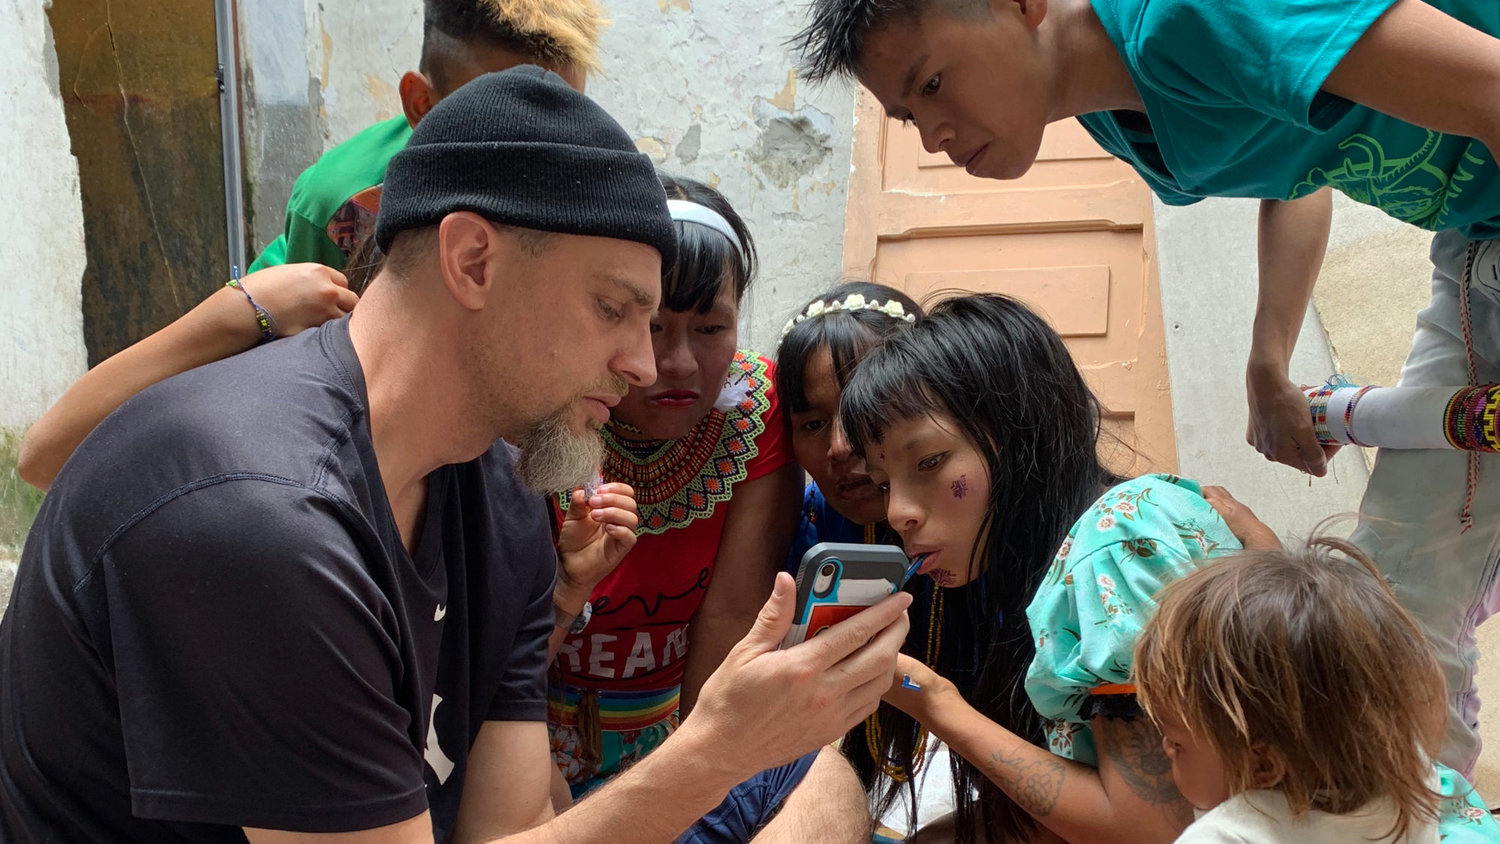 IMB missionary Travis Burkhalter visits with friends from an indigenous people group he serves among in Medellin, Colombia.